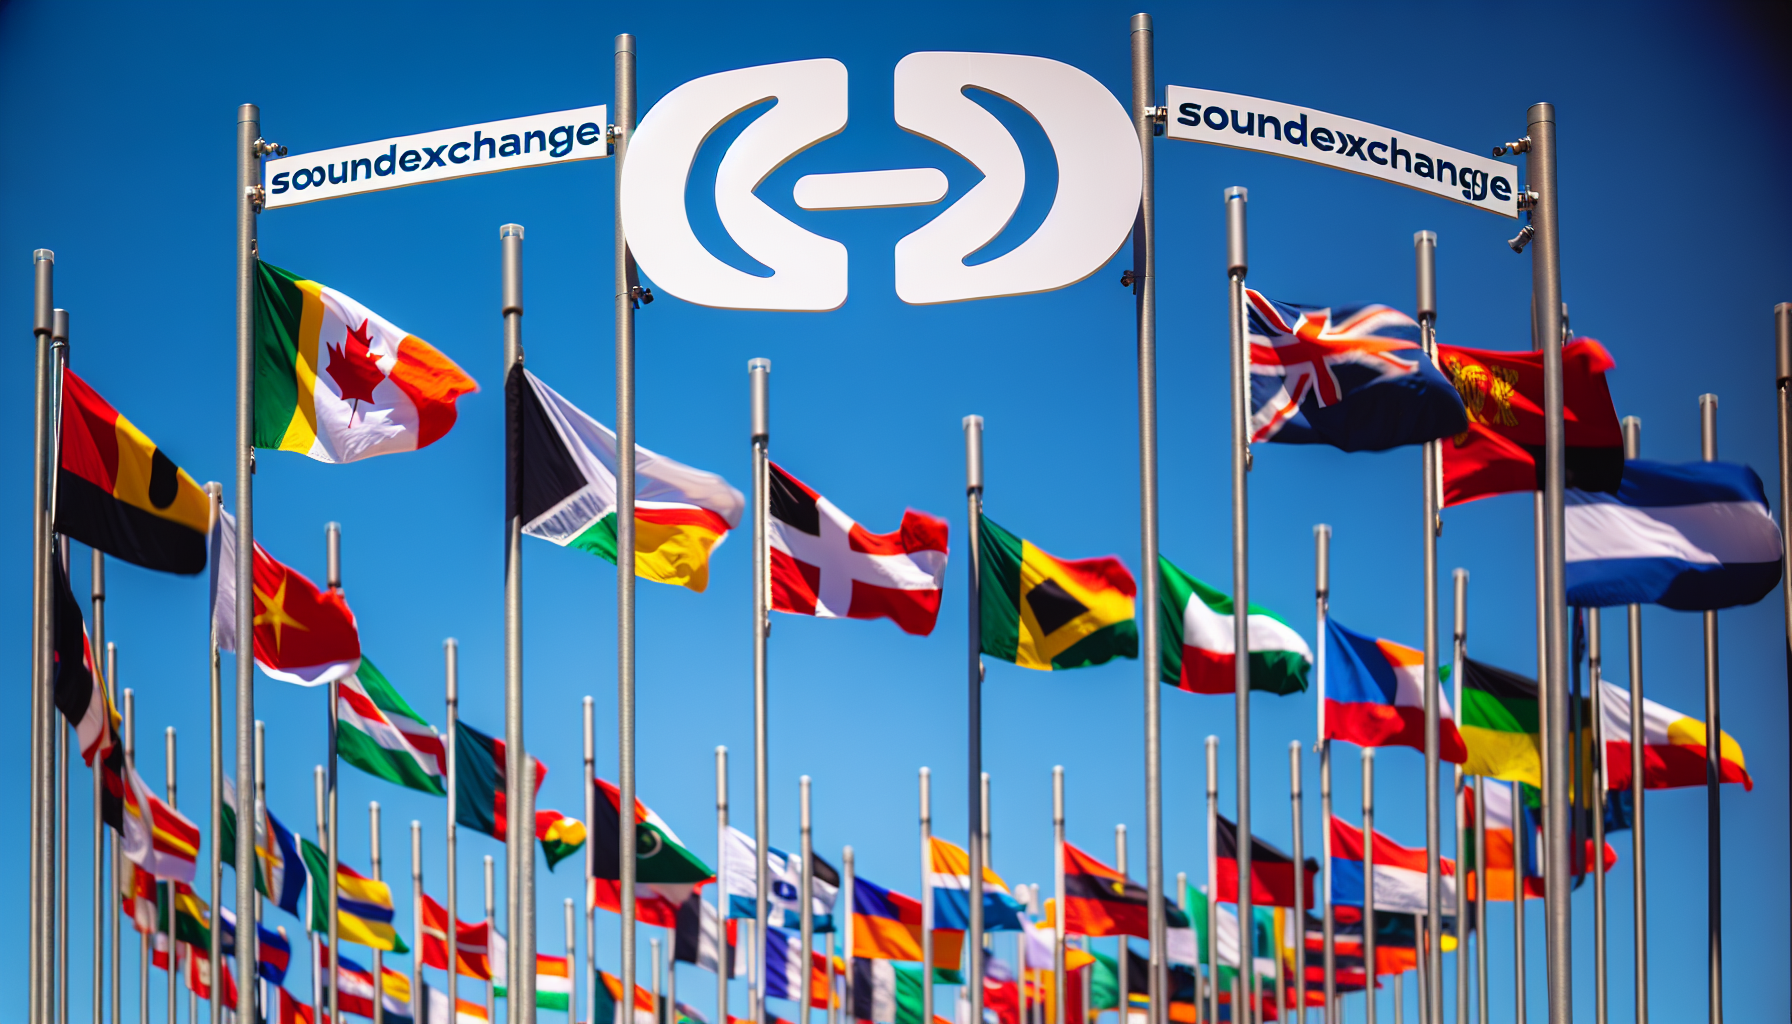 Global reach of SoundExchange with international flags